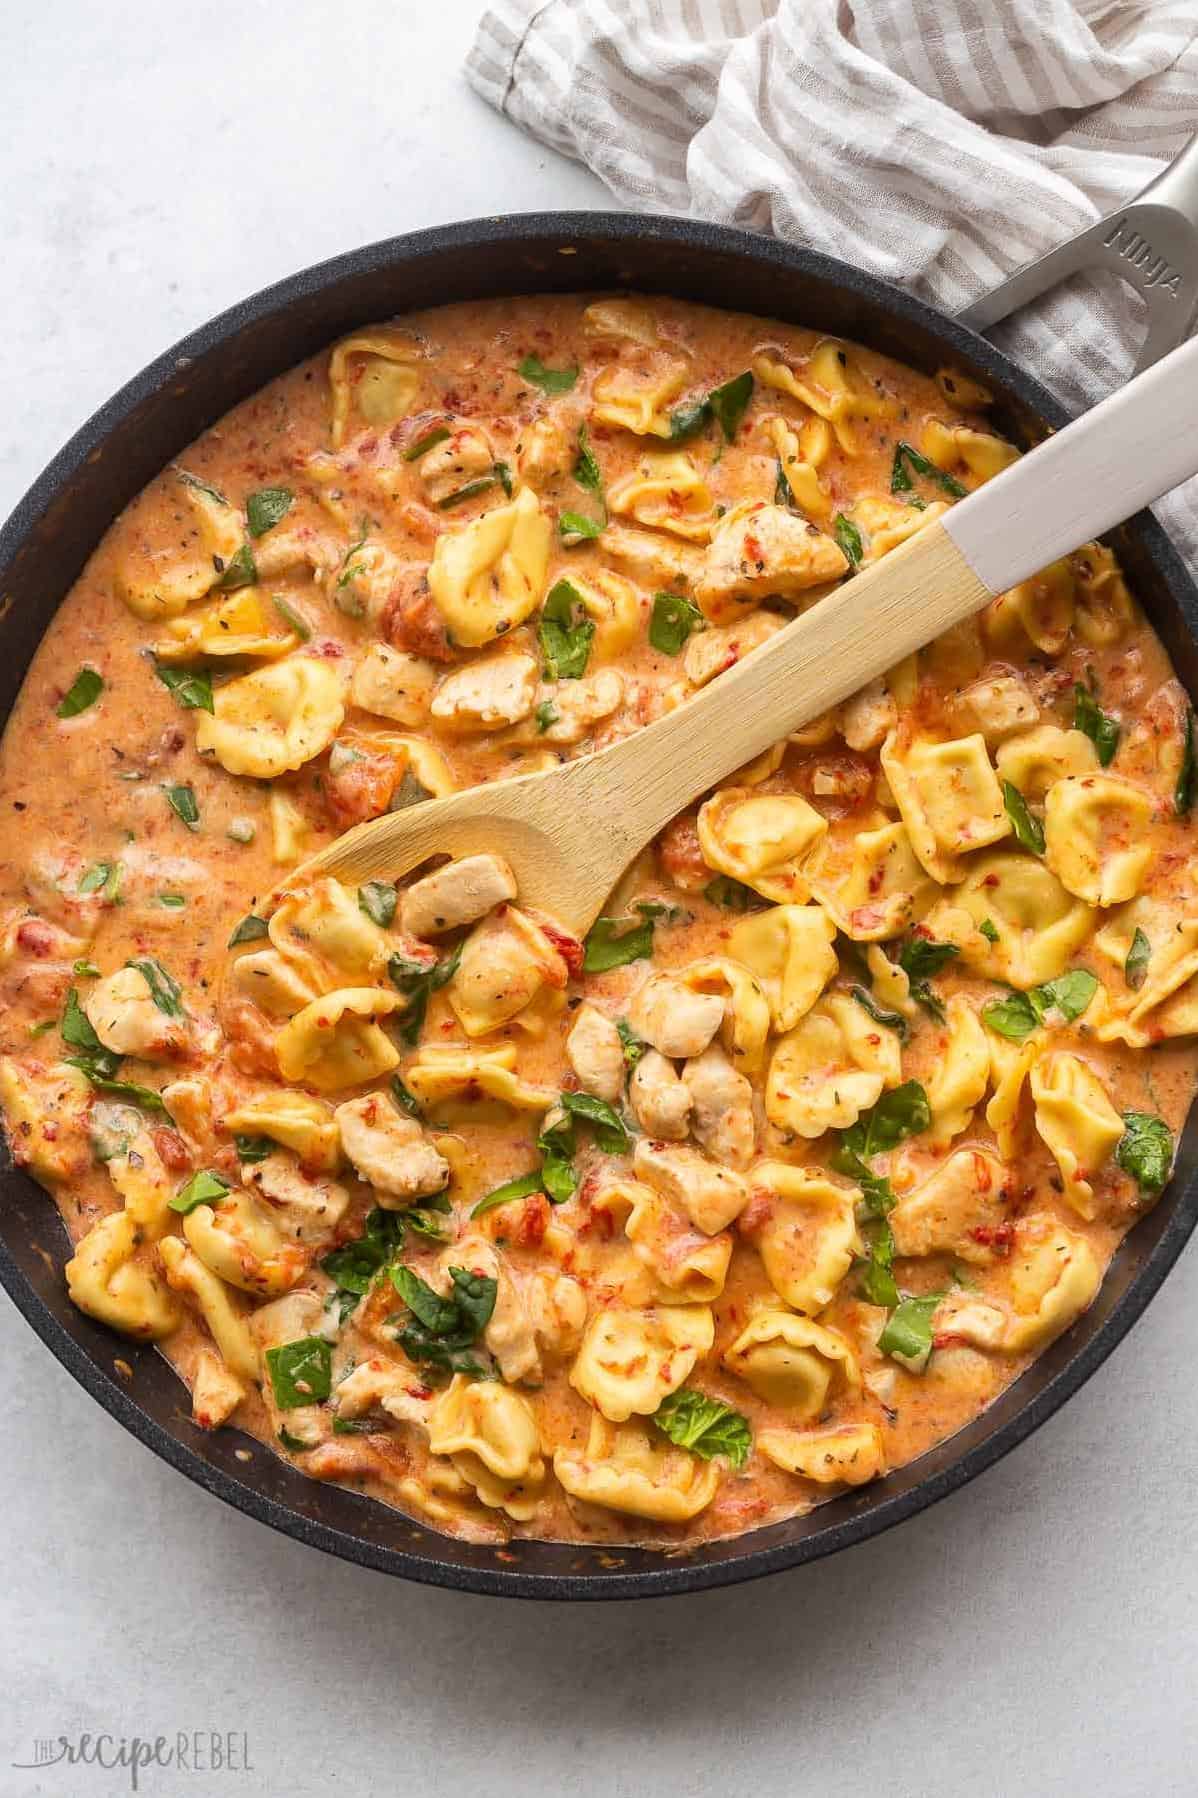 Flavorful Chicken Tortellini Recipe for A Perfect Dinner